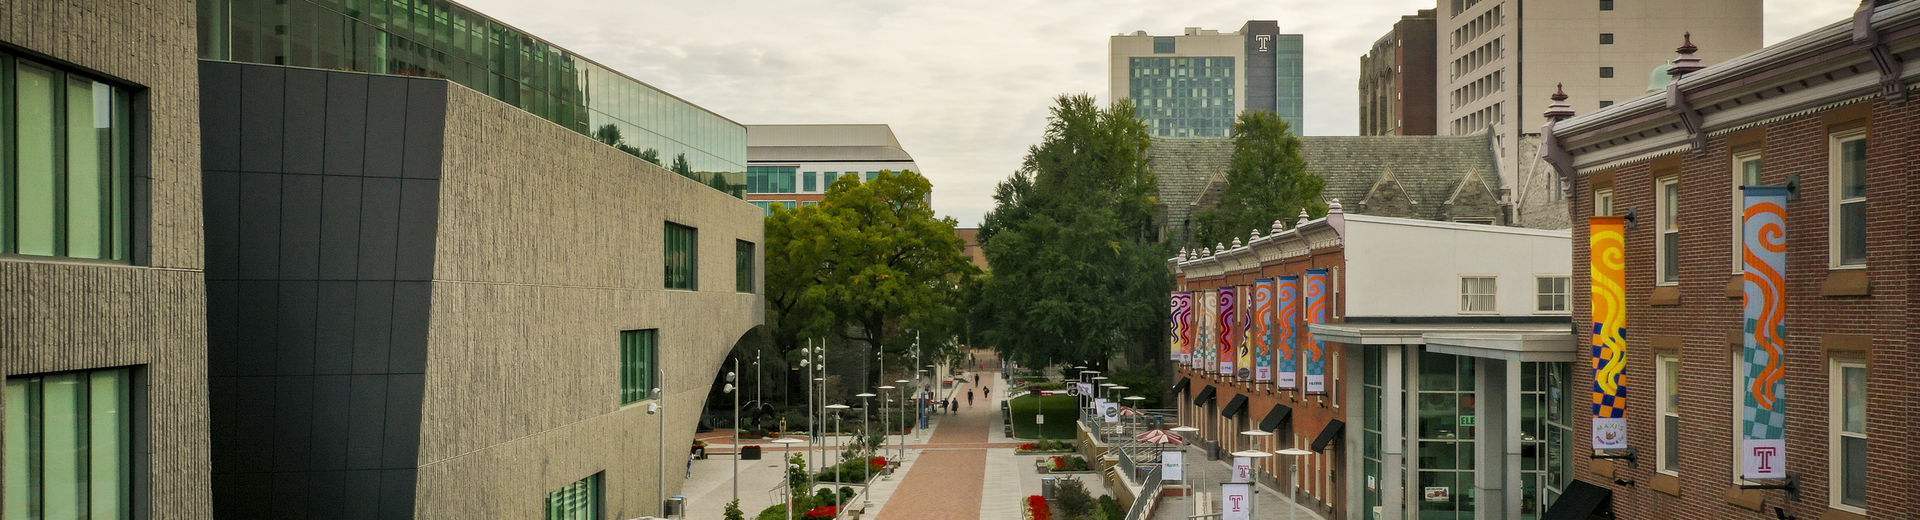 Aerial view of Liacouras Walk and the Charles Library